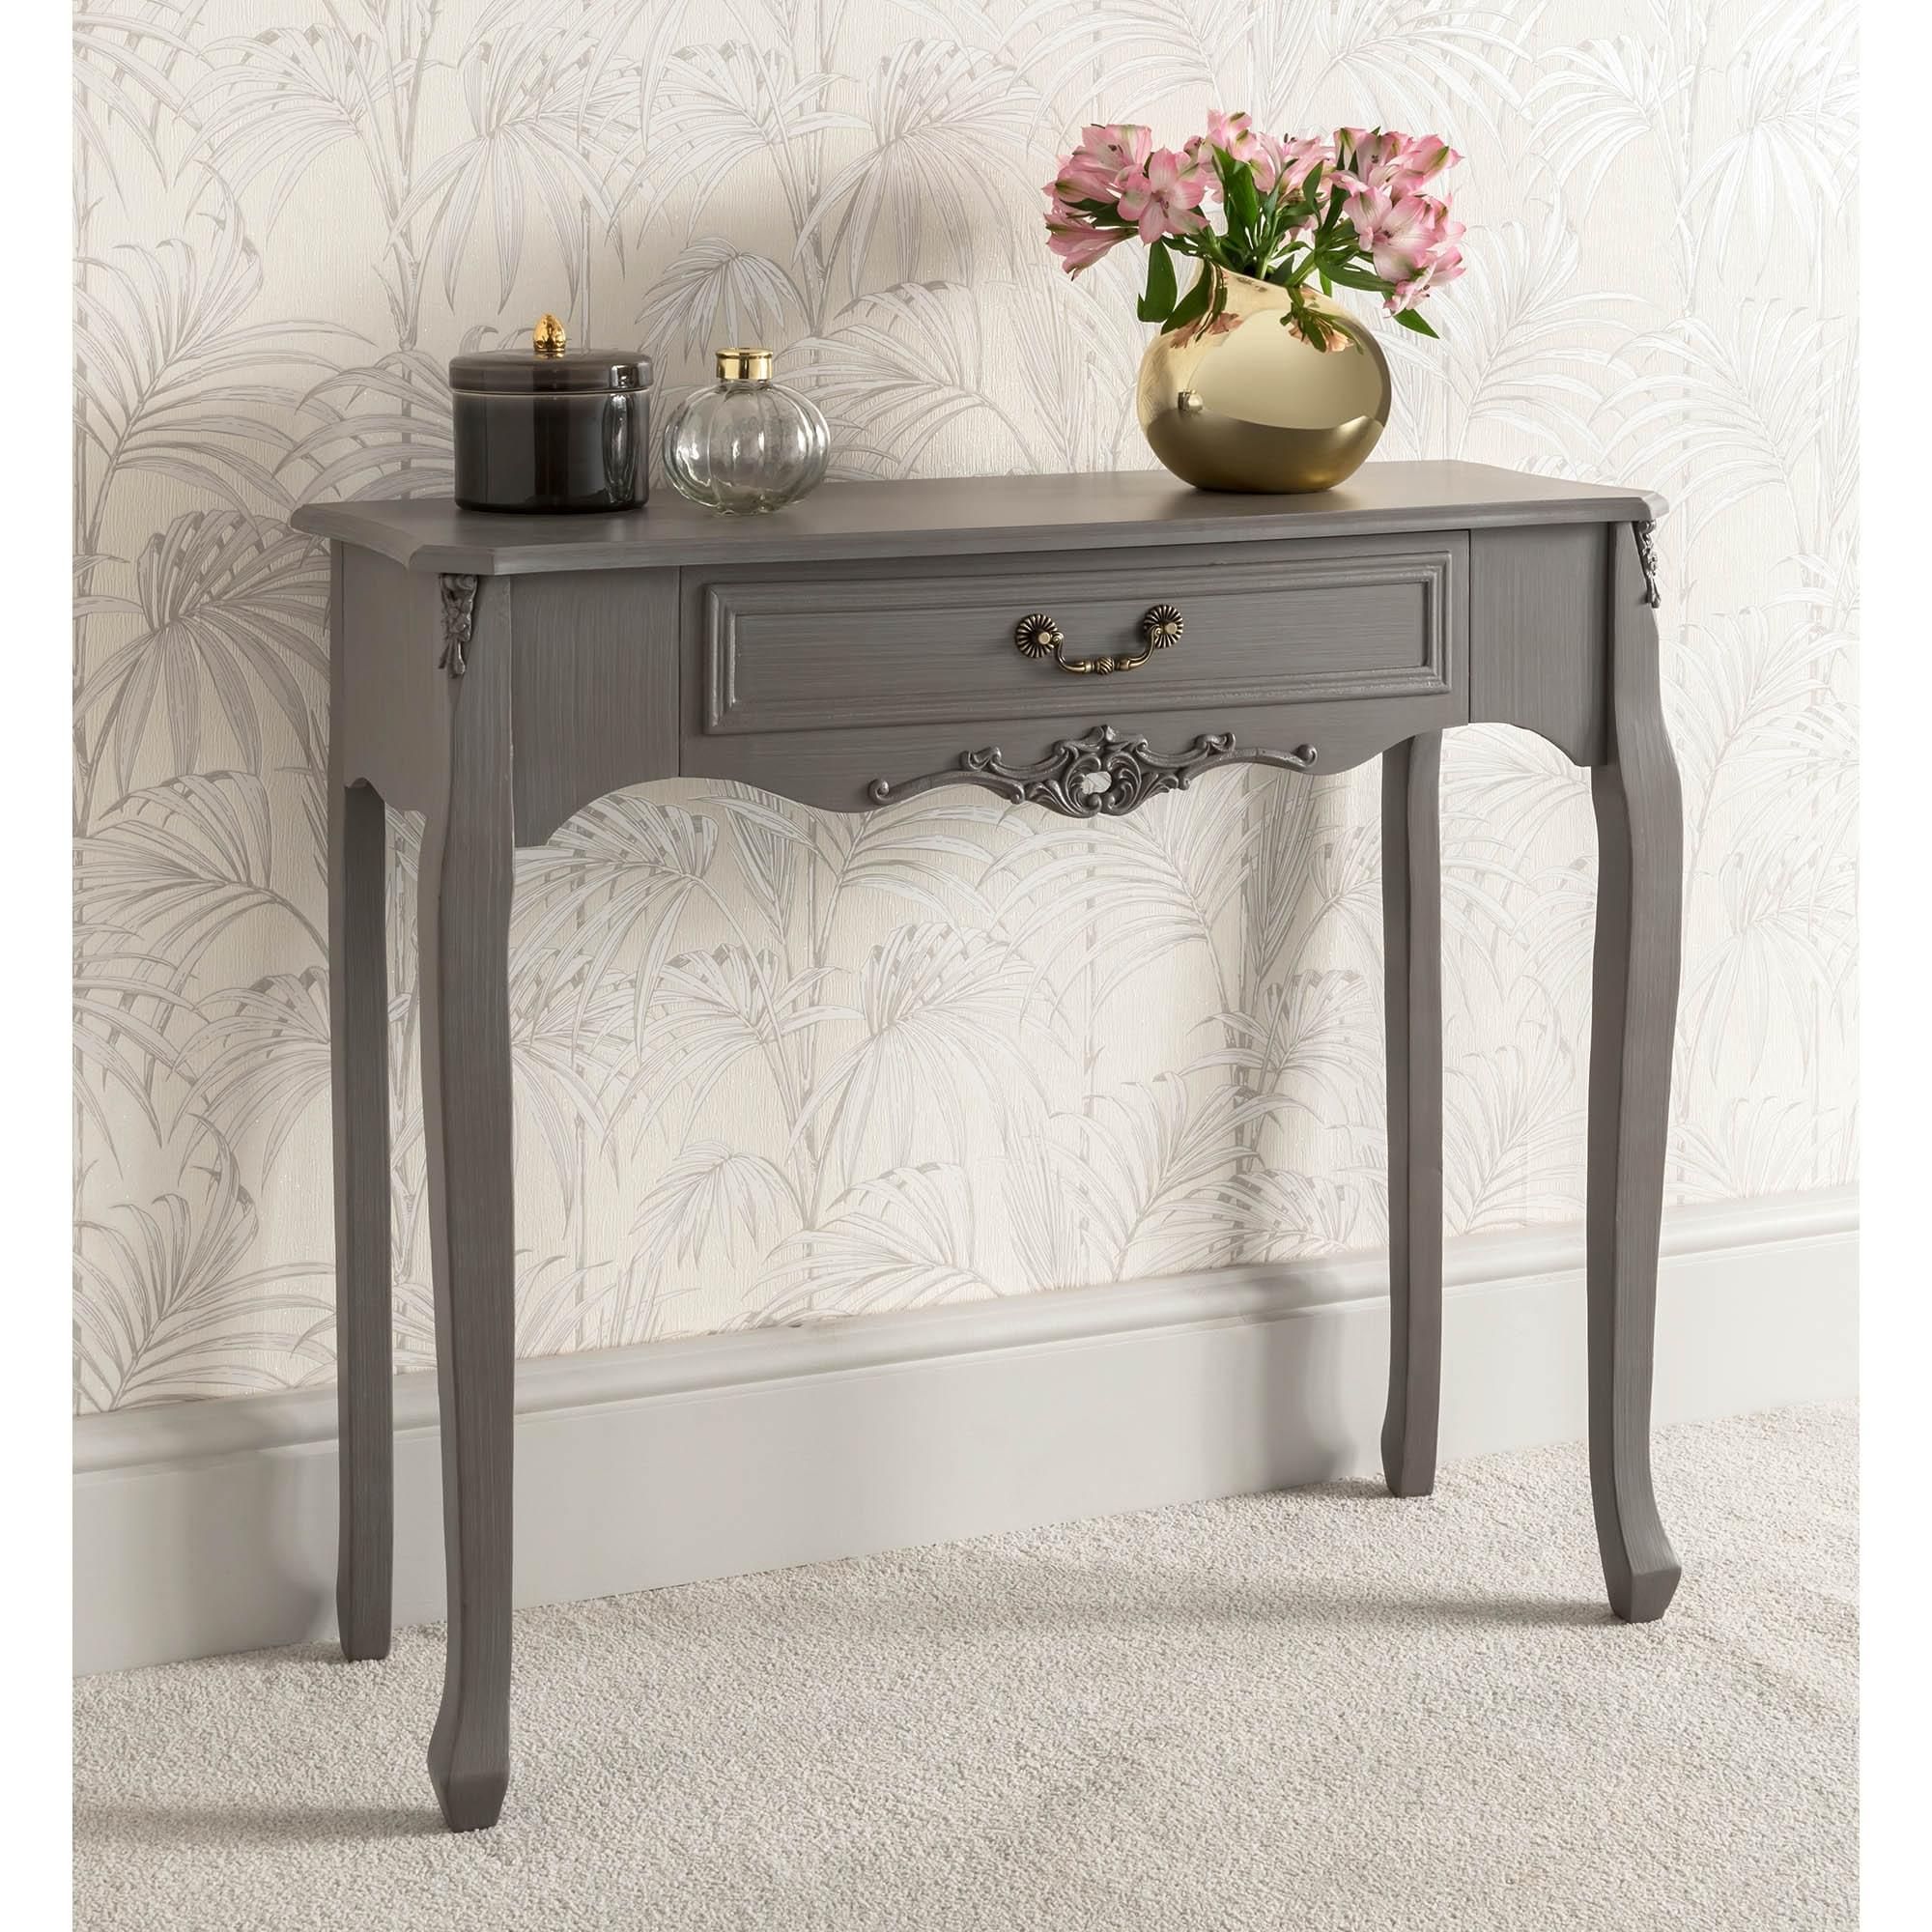 Grey 1 Drawer Antique French Style Console Table | Shabby Within Antique Console Tables (View 9 of 20)